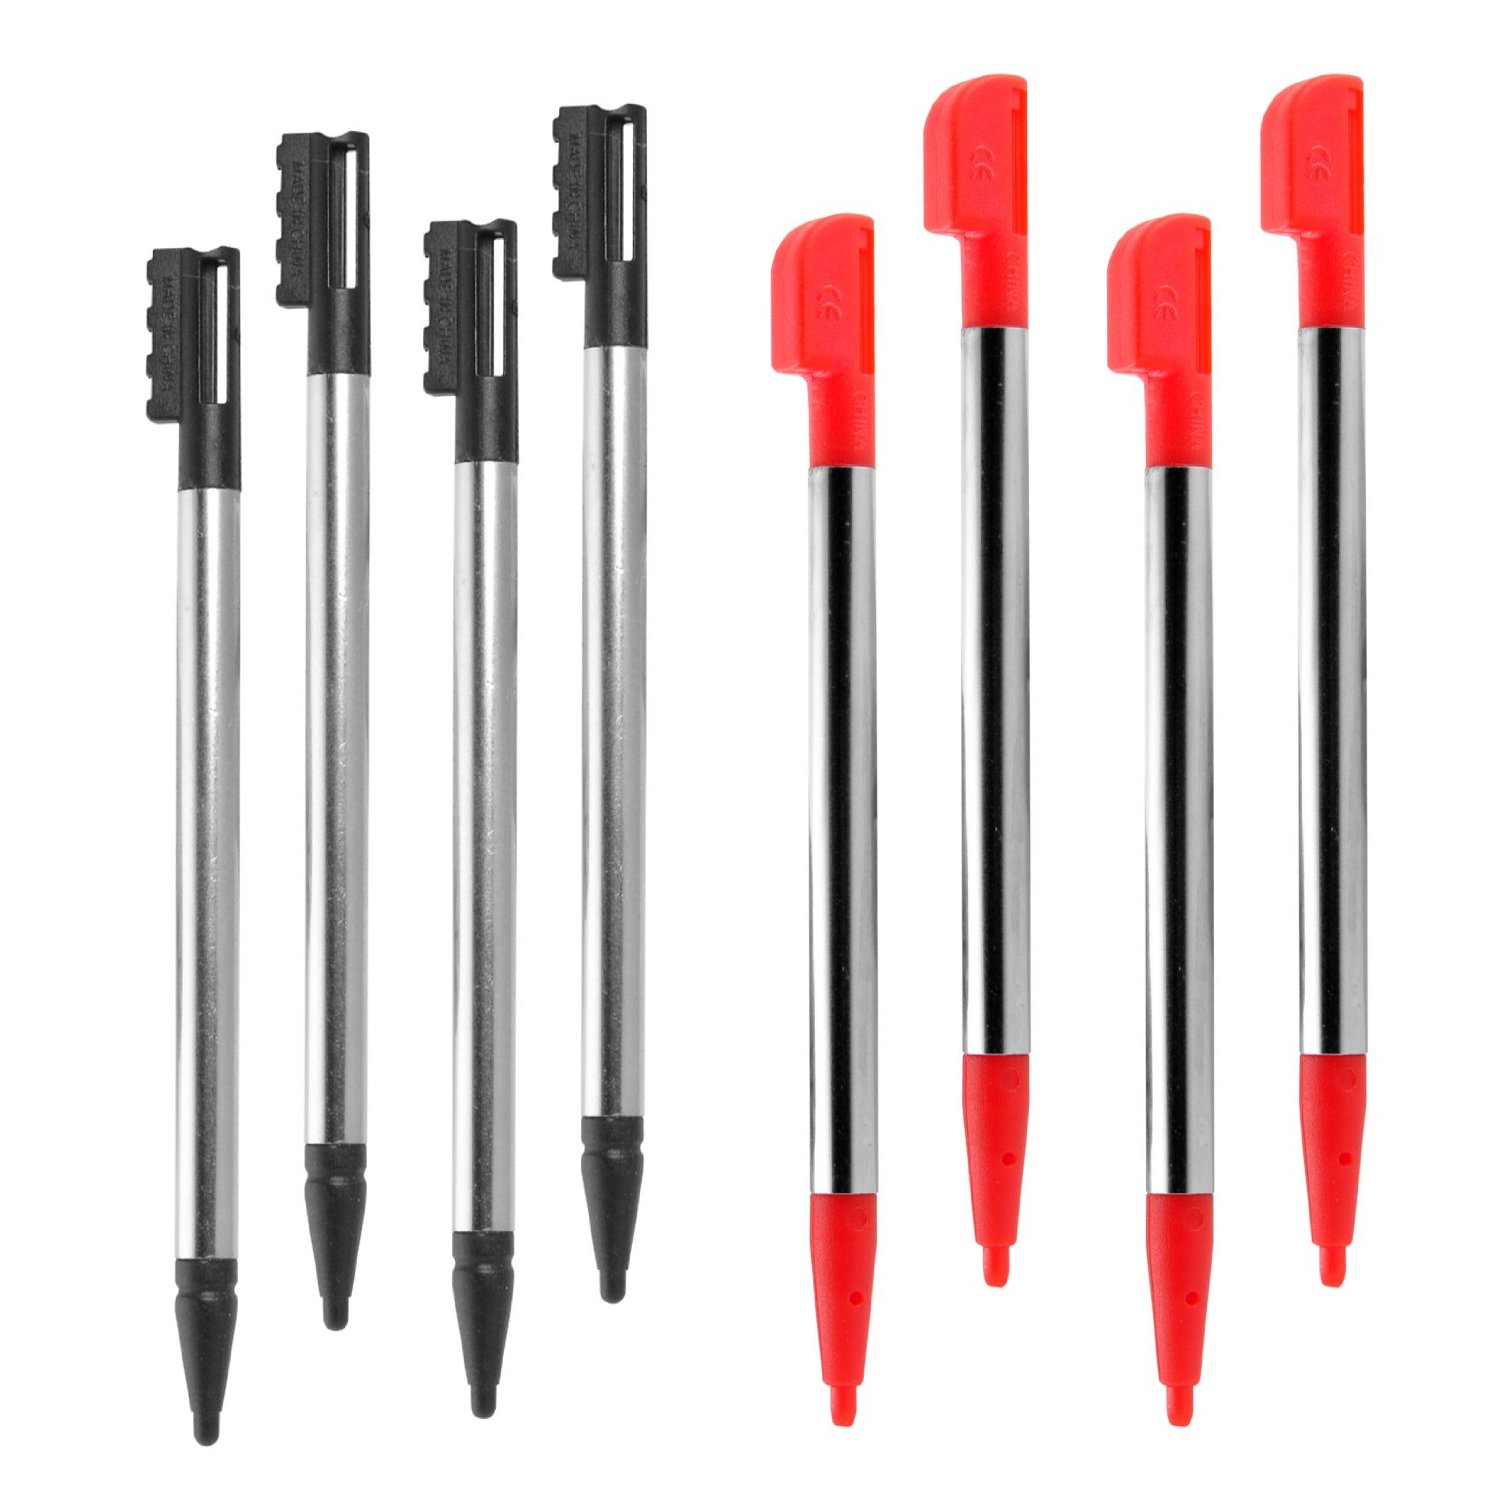 Competition Pro DSL and DSi Metal Stylus Pens